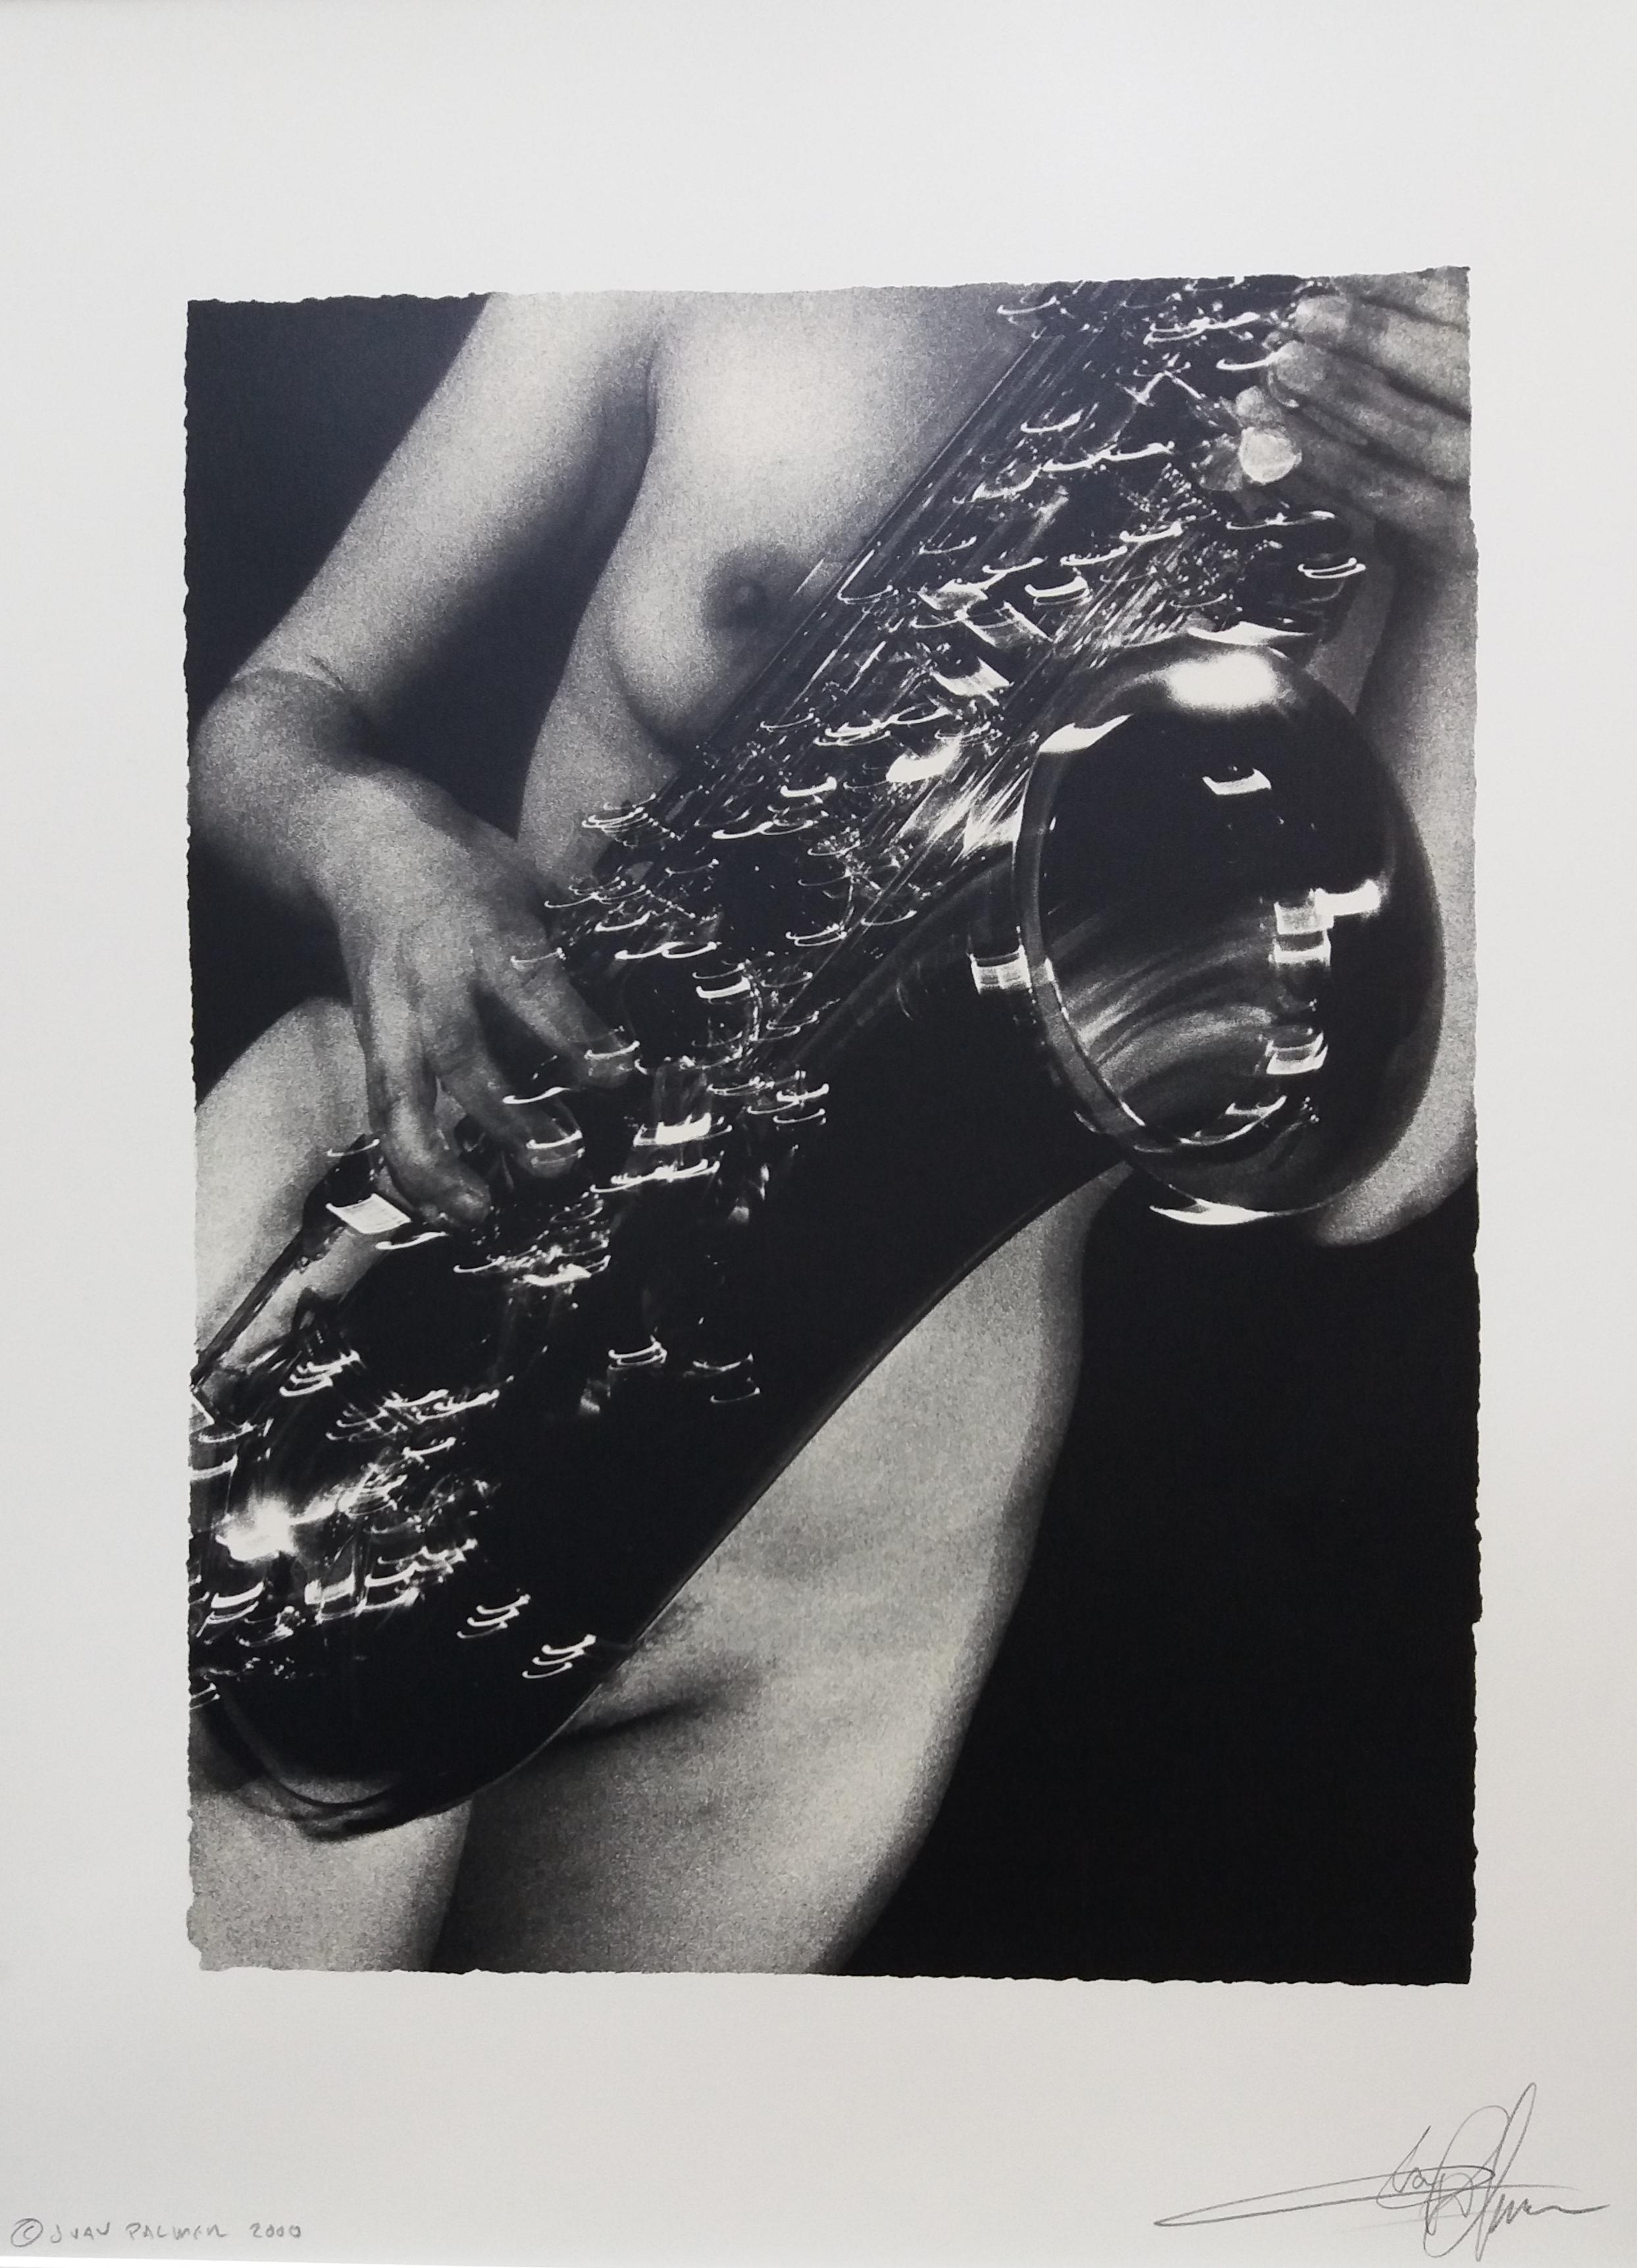 Naked Sax Artistic Photography. 
JUAN PALMER (MFIAP - Teacher of the Federation International de l'Art Photographique)
In love with Photography in all its aspects and especially the one that has as its object the person (Portrait, Travel, Fashion,